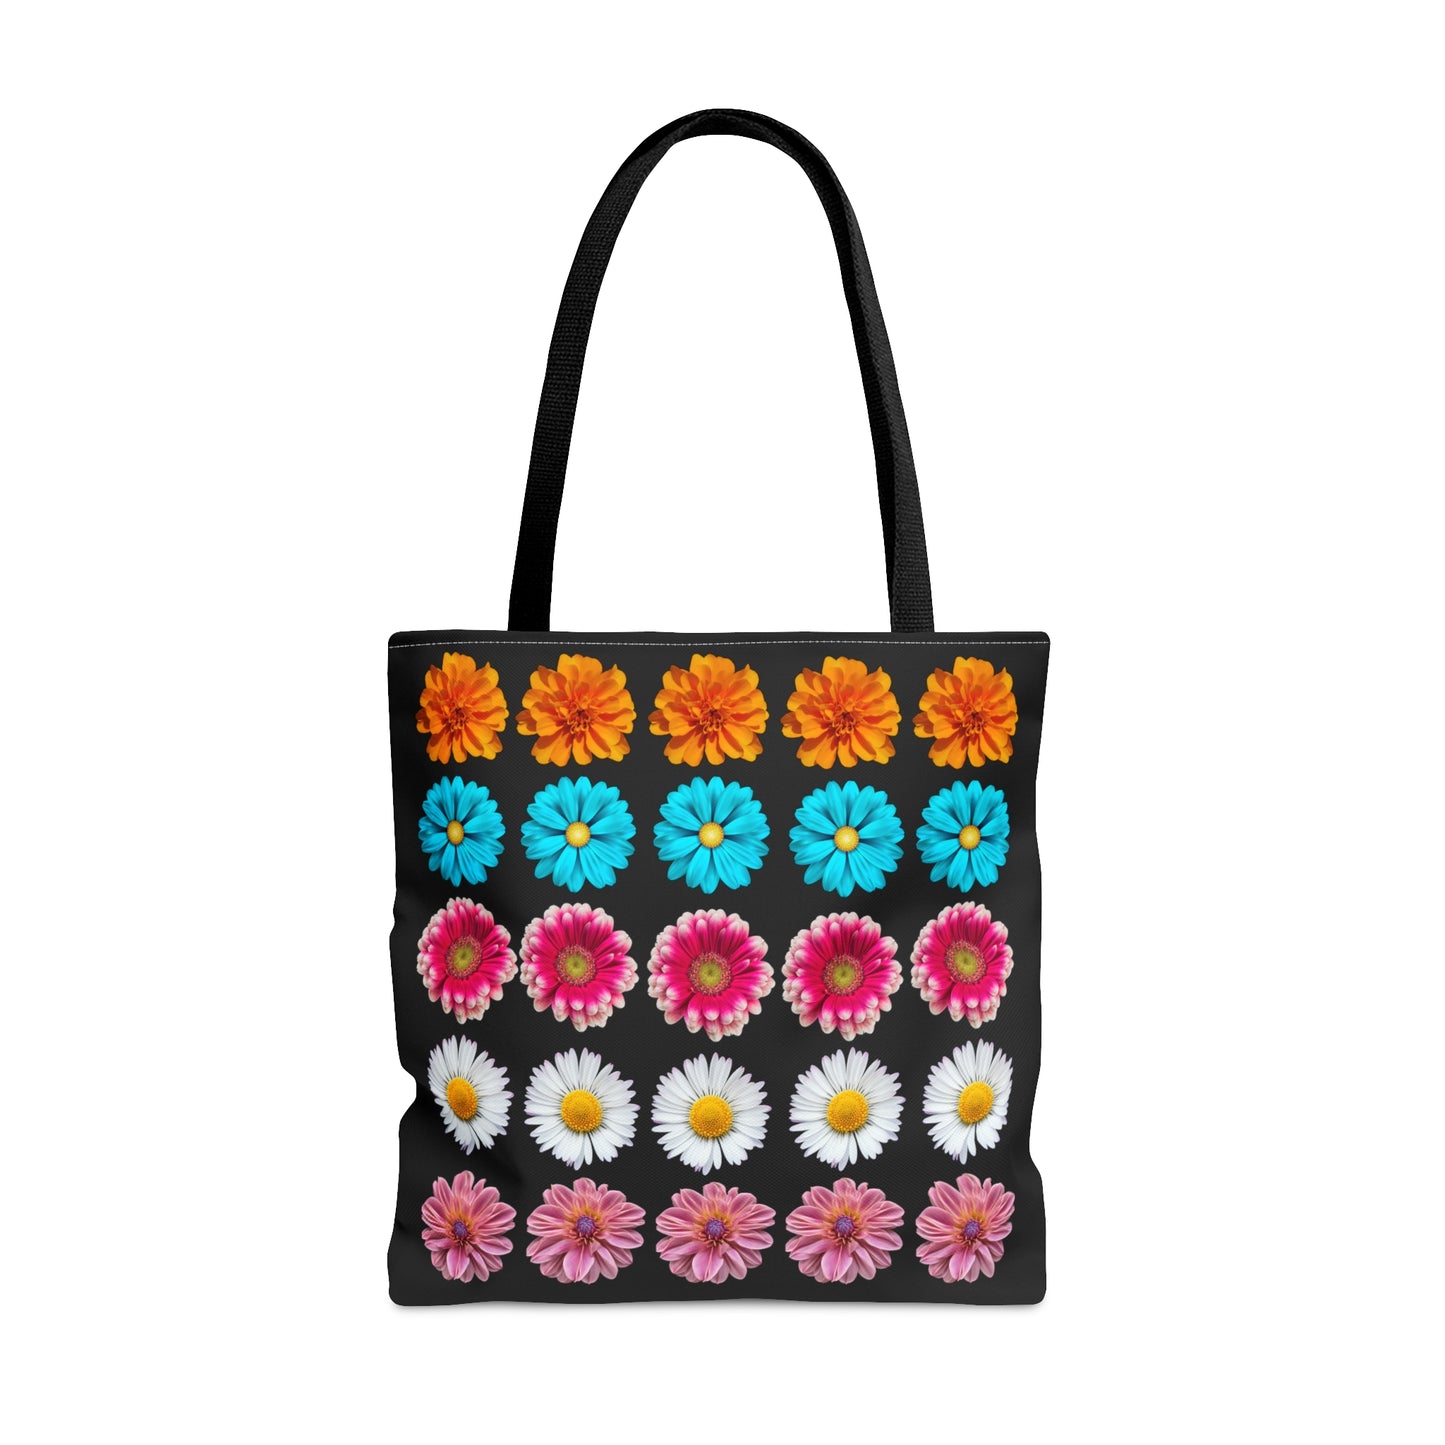 Beautiful flowers on both sides of this tote bag. Come in 3 sizes to meet your needs.